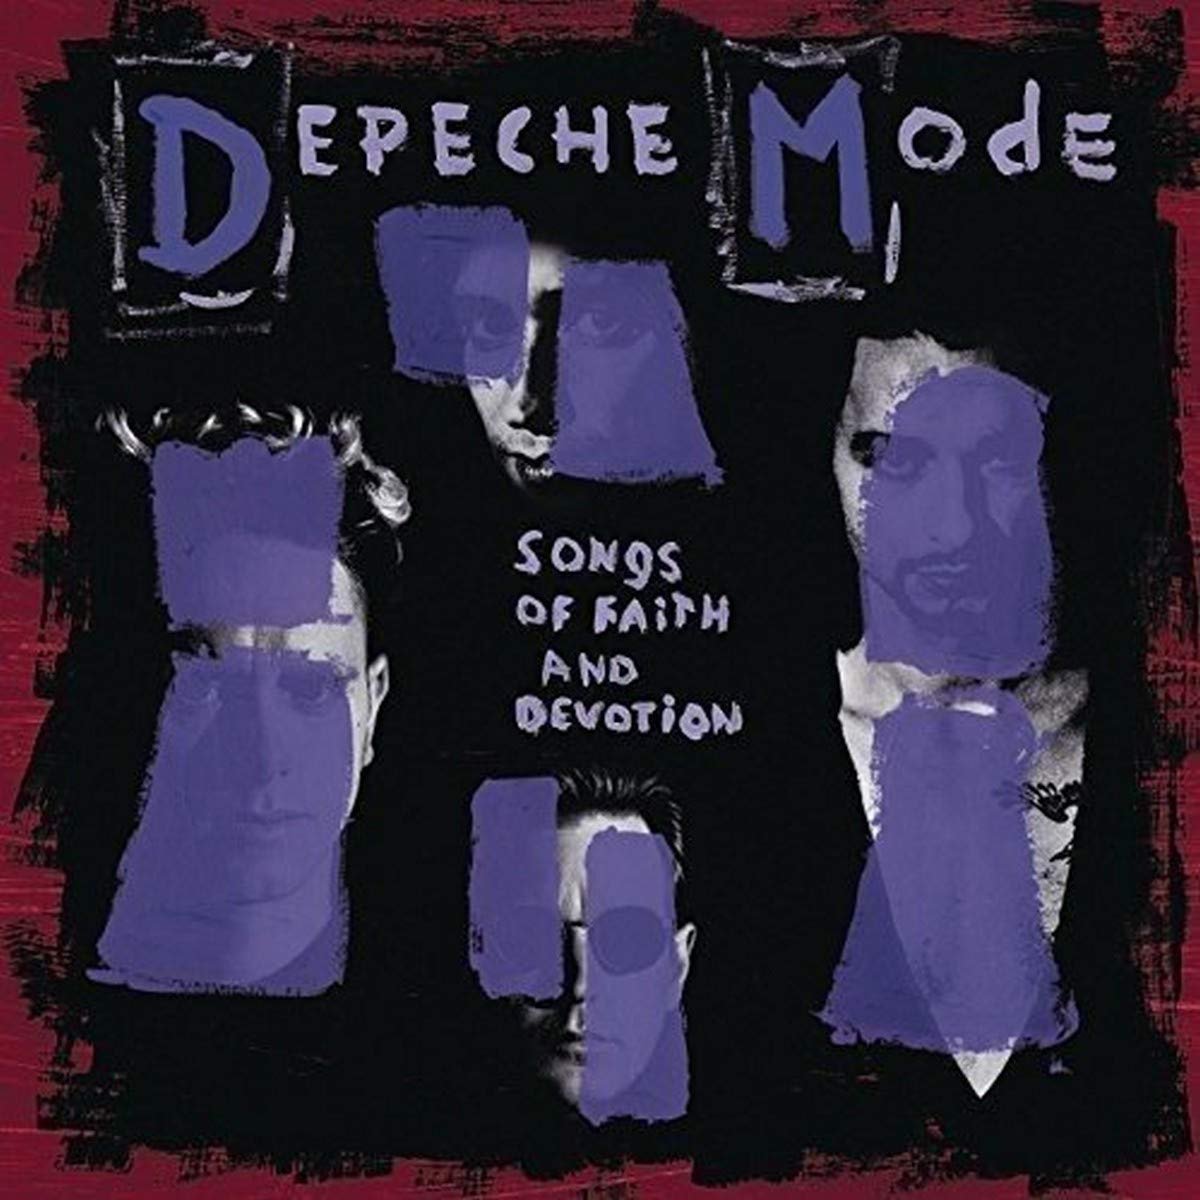 'Songs of faith and devotion' – Depeche Mode 